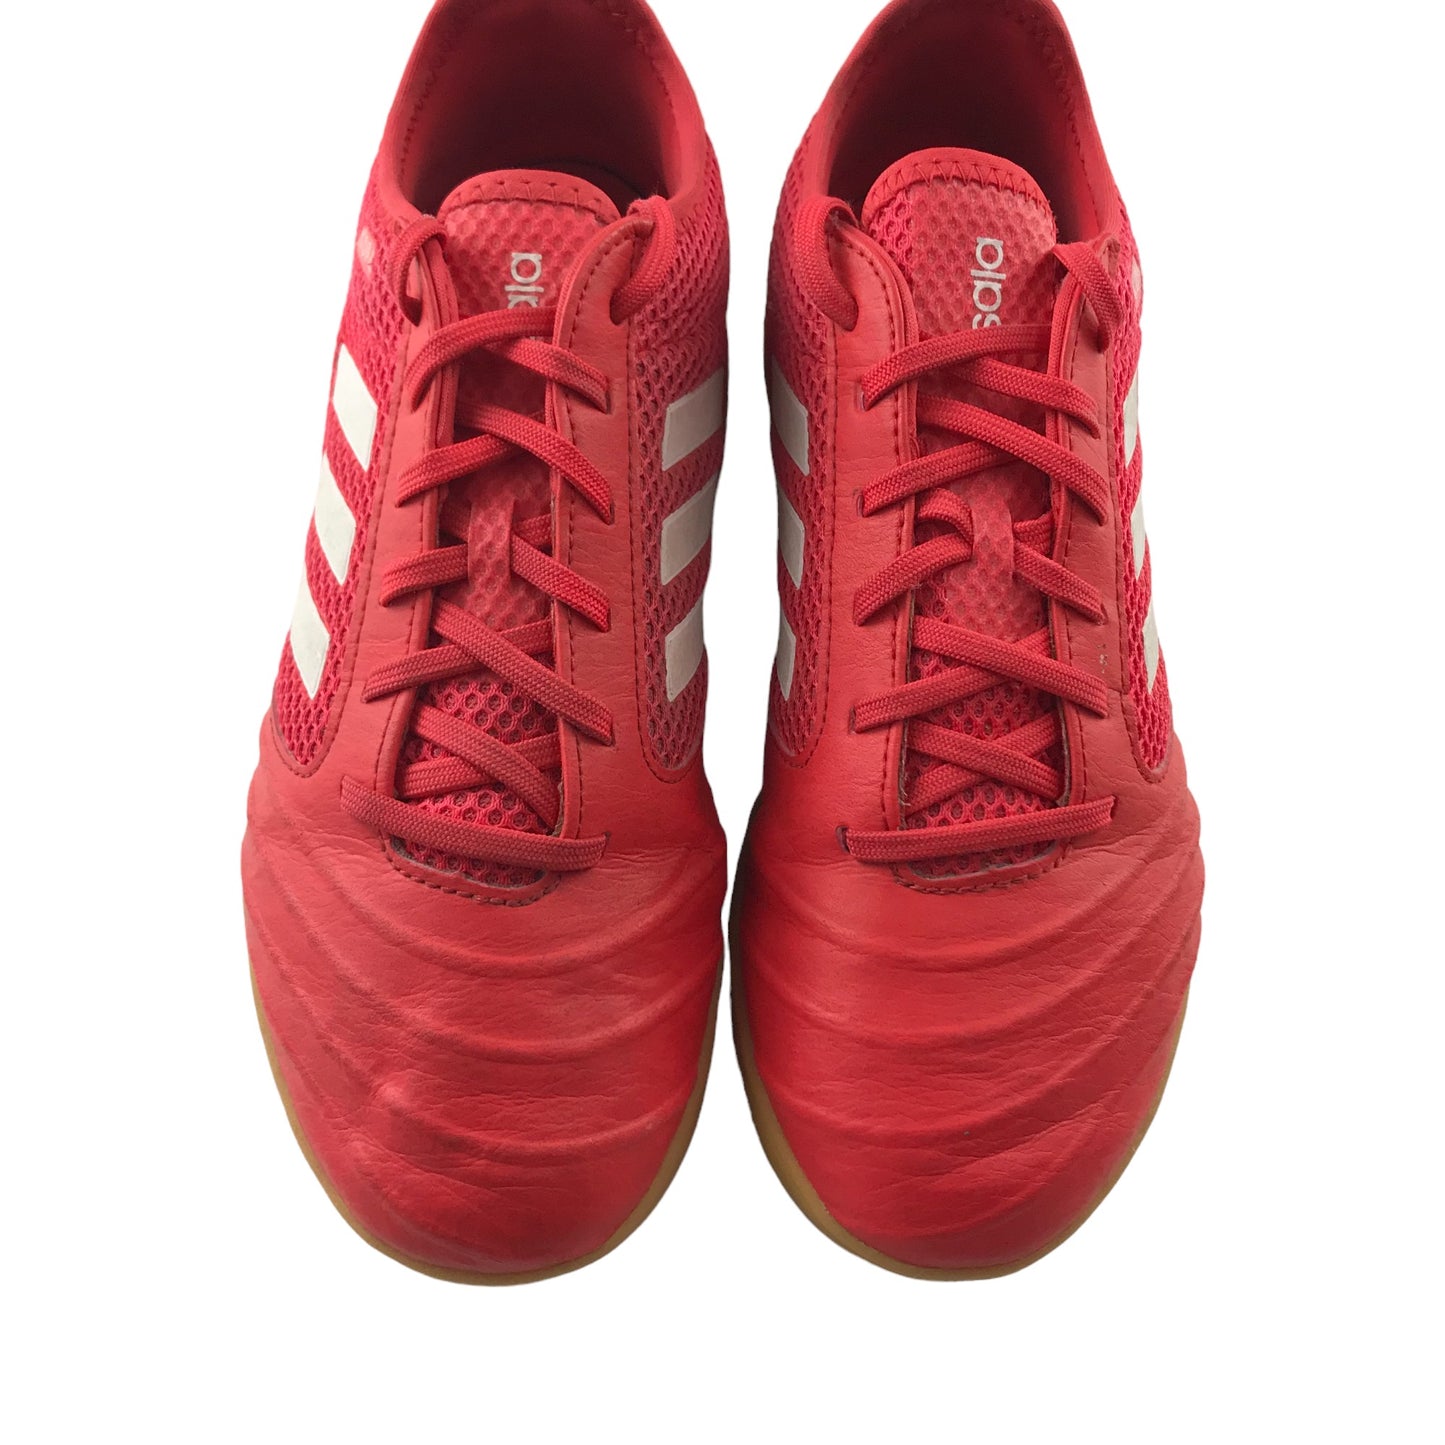 Adidas Copa Football Boots Shoe Size 5 Red Indoors Mesh Design